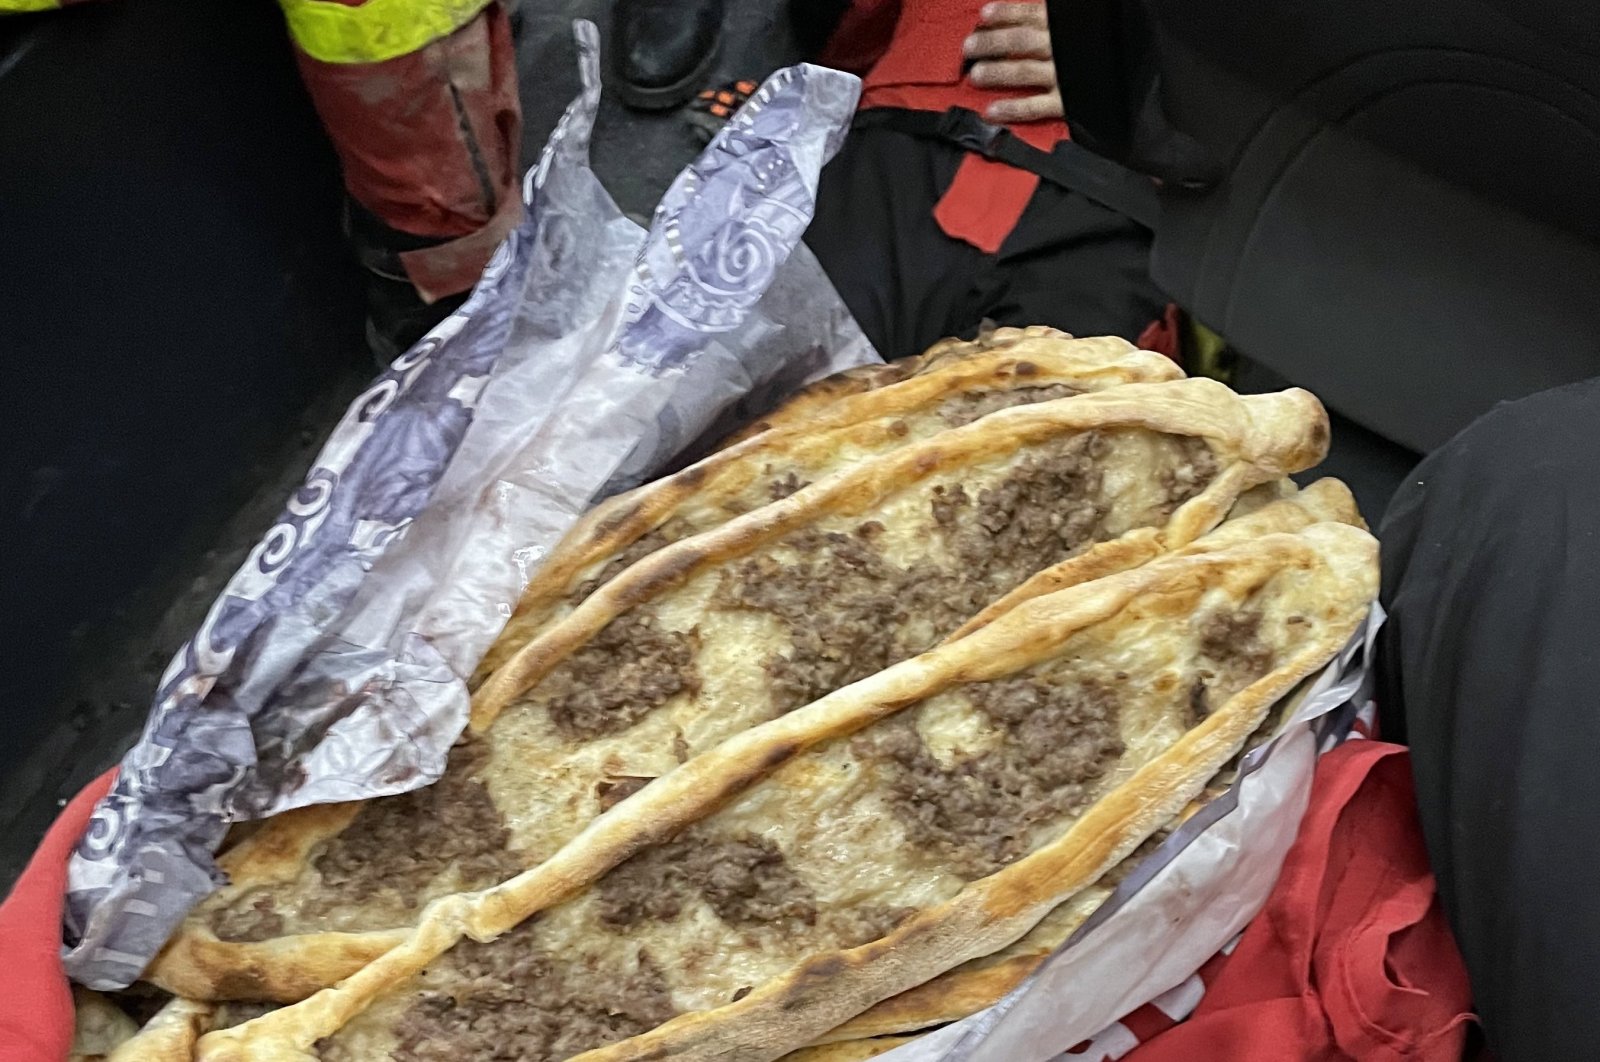 The photo of Pide bread offered to Spanish rescue team by earthquake victims in Türkiye, Feb. 9, 2023. (From Twitter / @  Bomberos GIRECAN. USAR Light &amp; K9 Team)